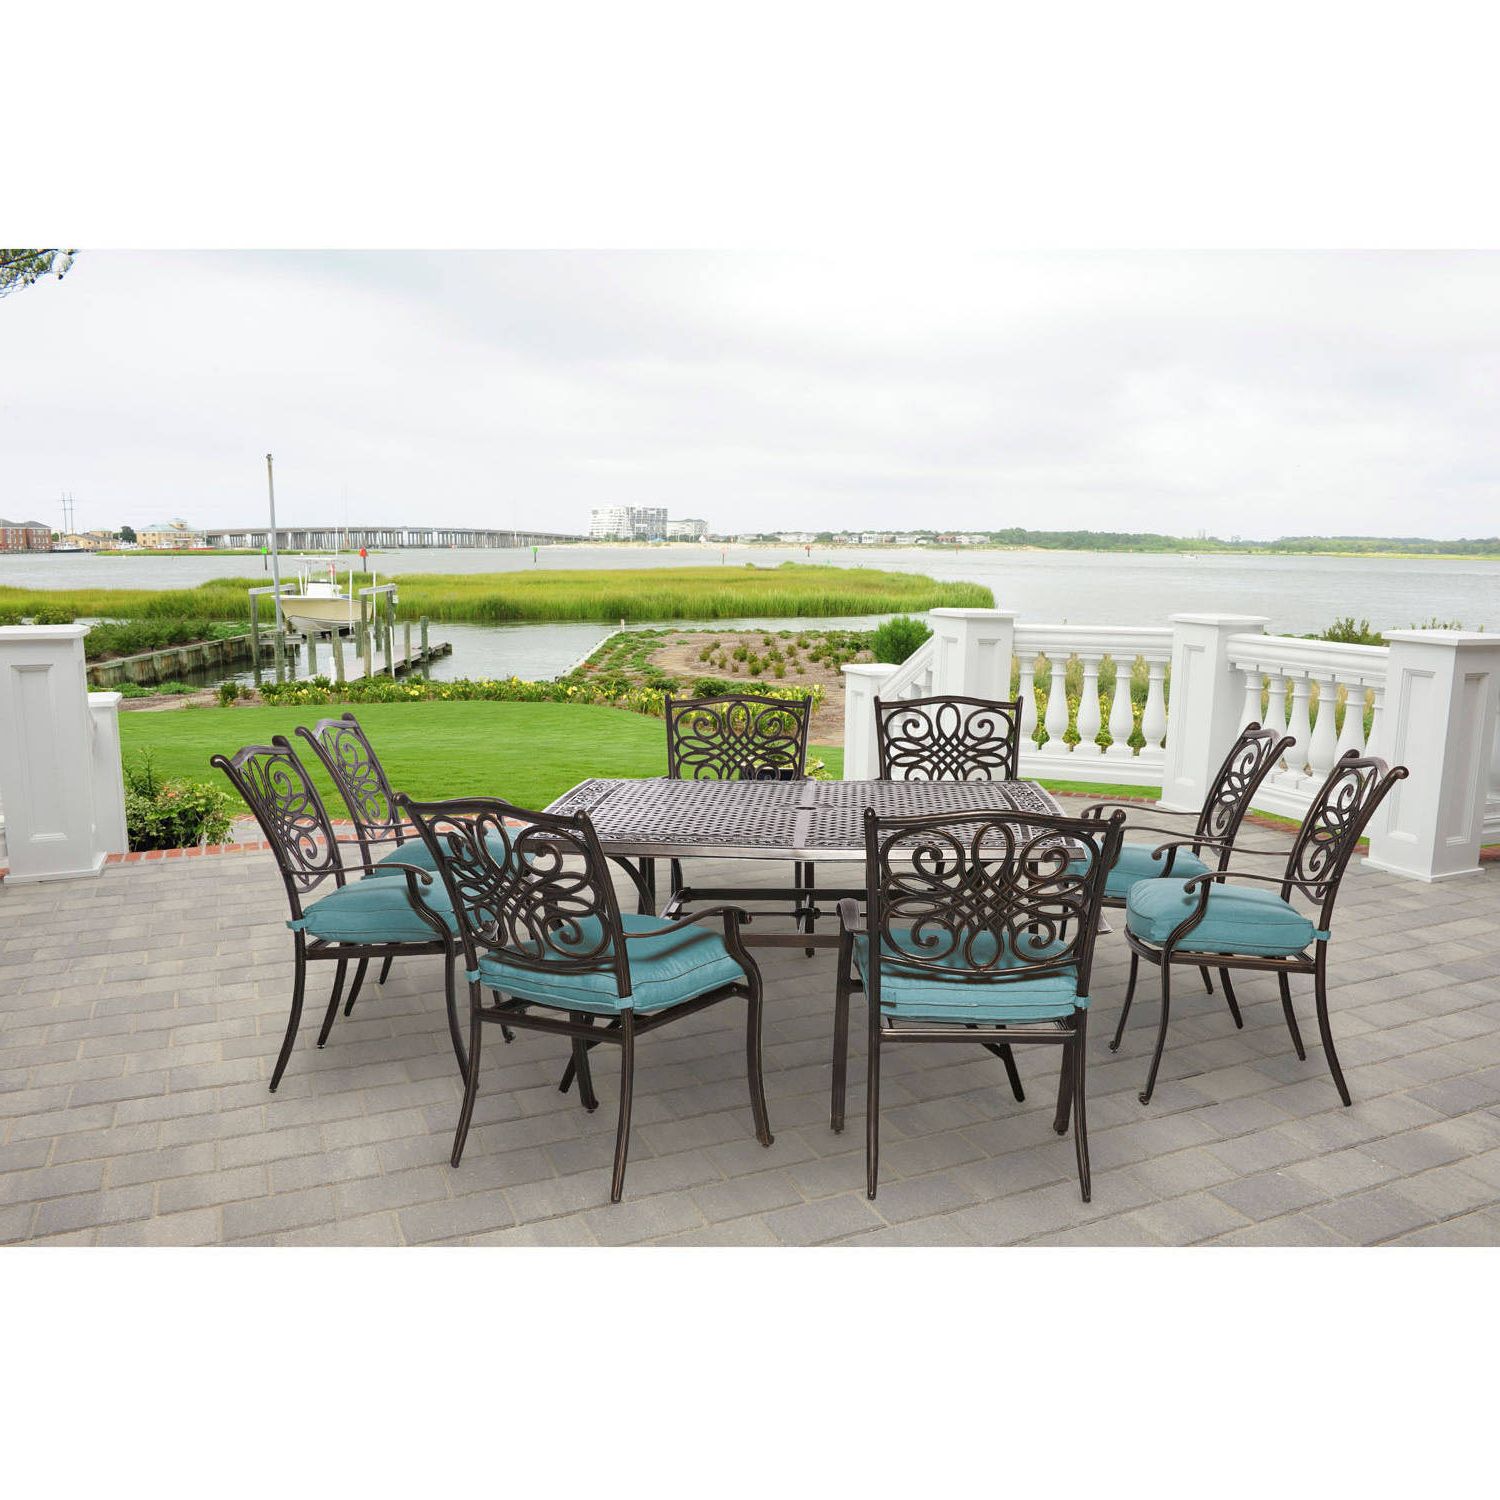 Newest Cambridge Seasons 9 Piece Square Outdoor Dining Set – Walmart With 9 Piece Square Patio Dining Sets (View 6 of 15)